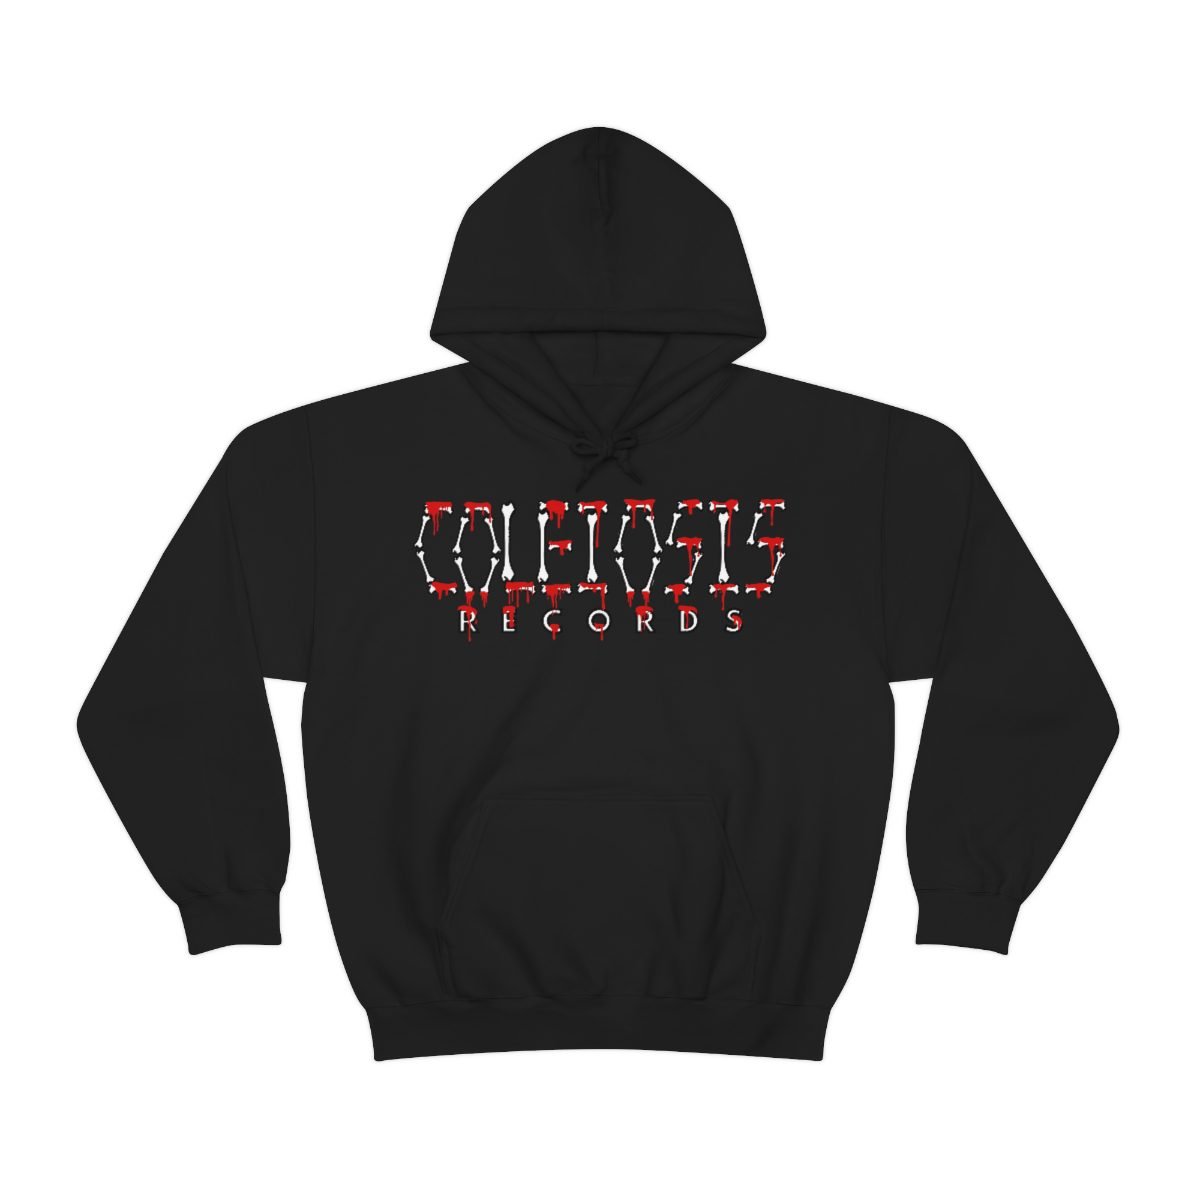 Coleiosis Records Logo Pullover Hooded Sweatshirt 185MD